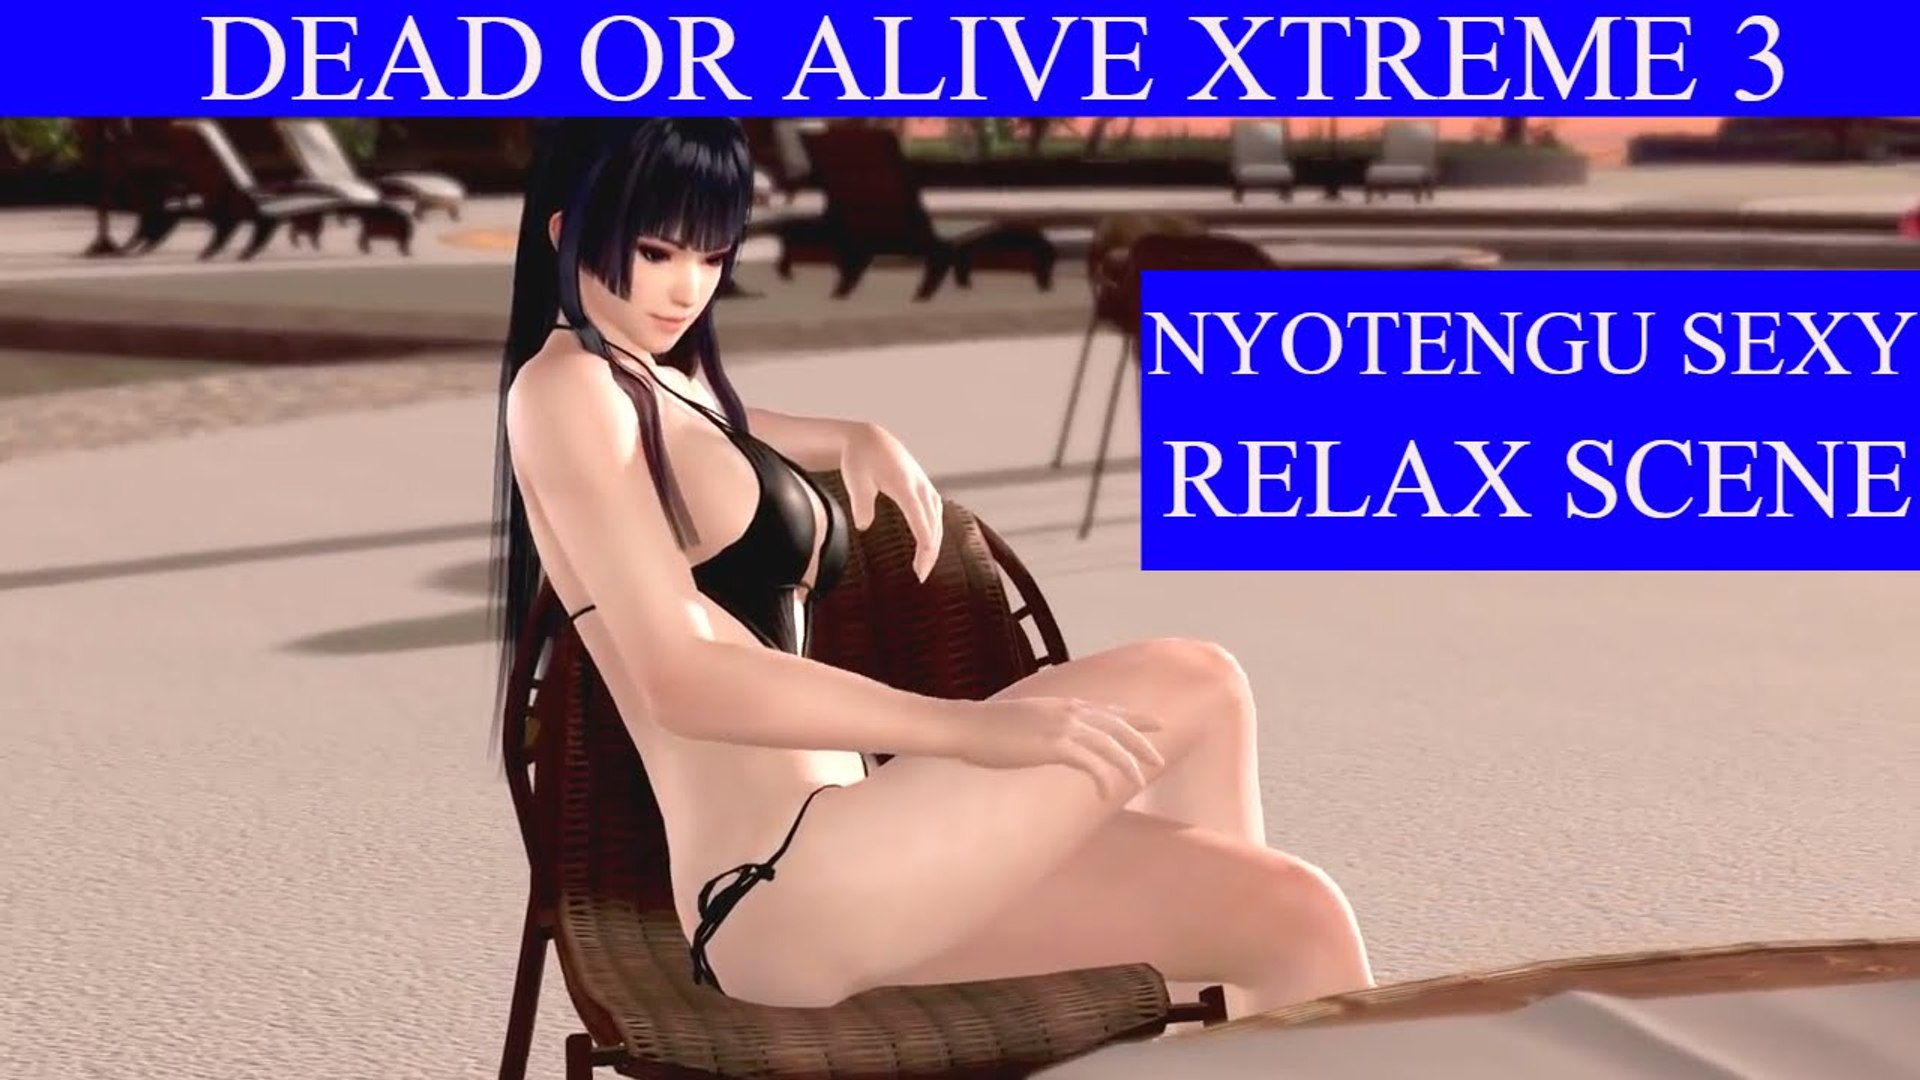 Dead or alive xtreme 3 sex